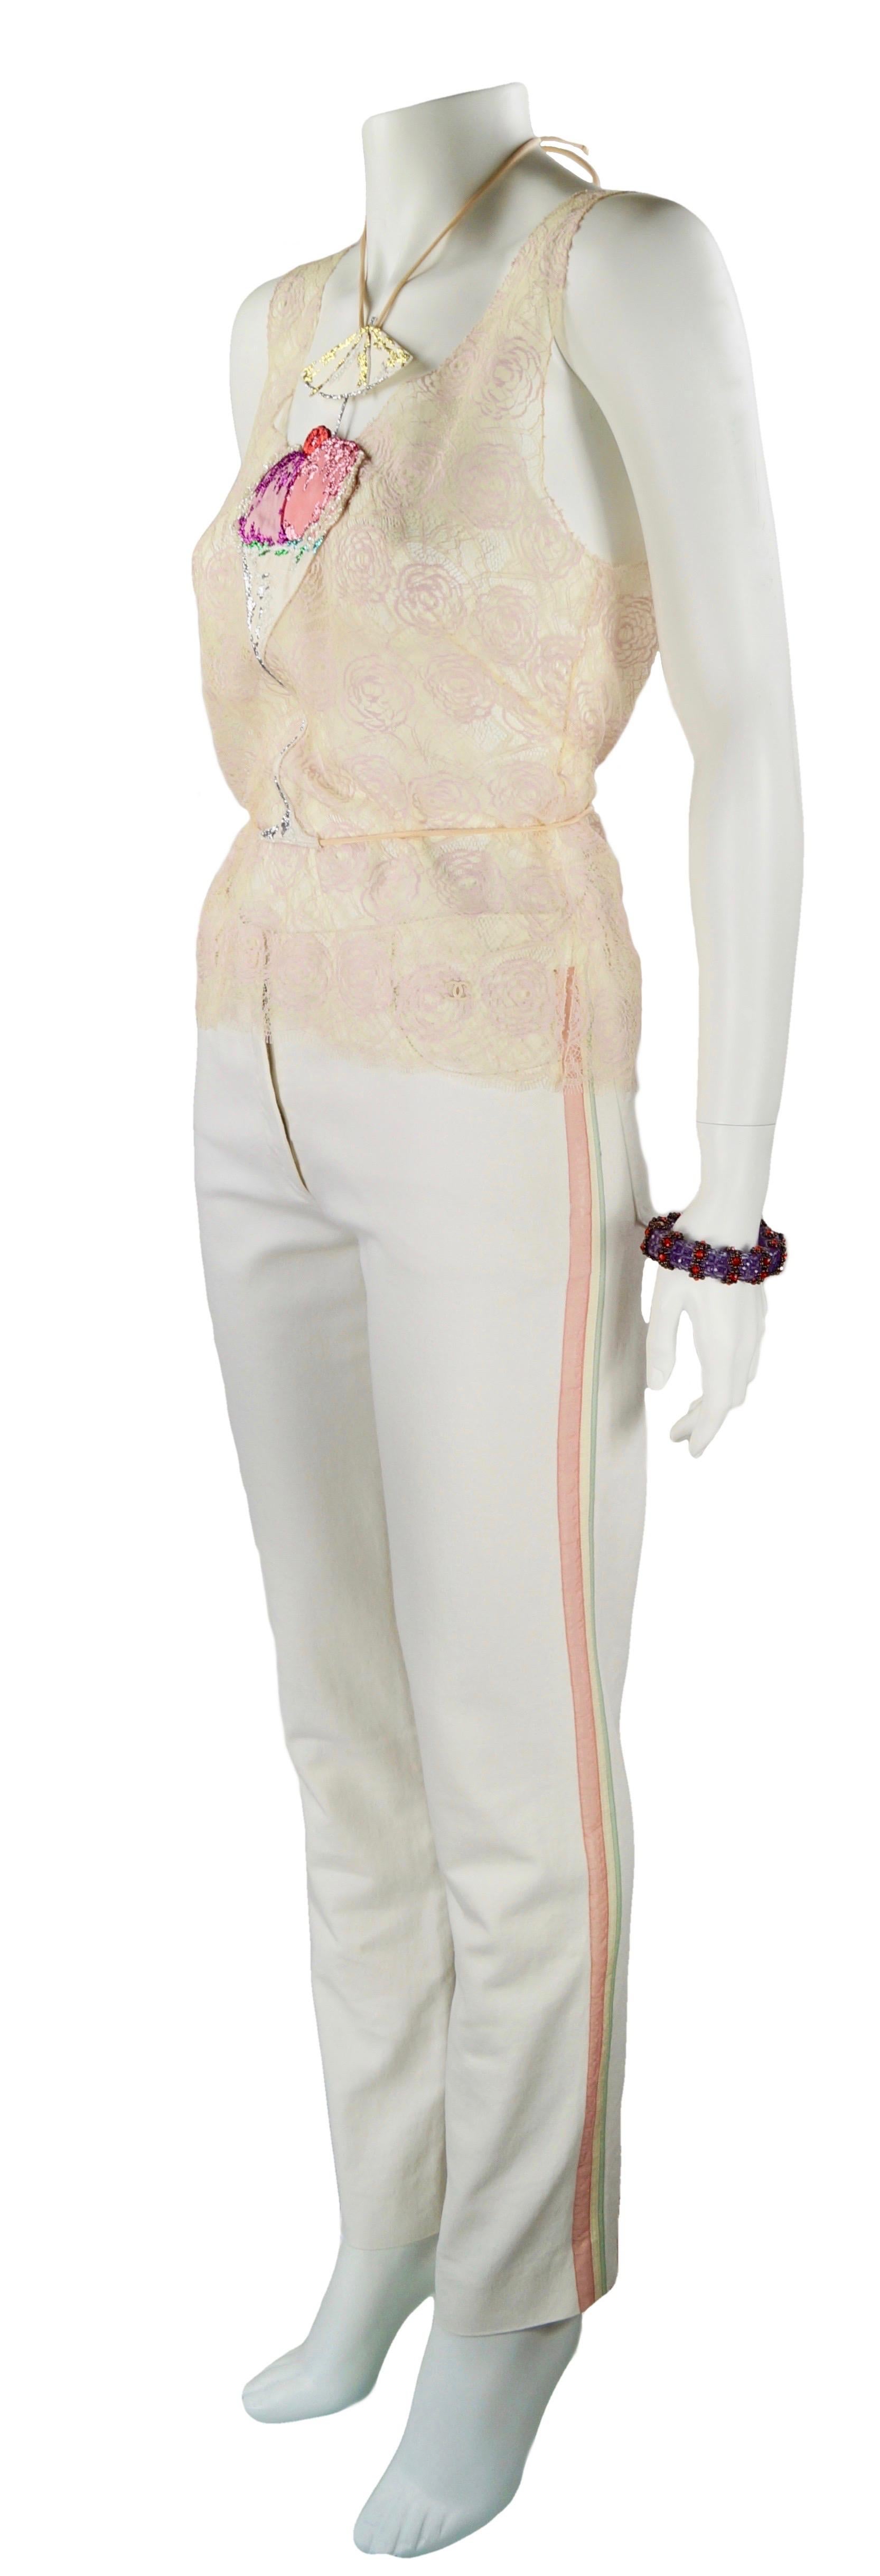 CHANEL Resort 2004
Pale pink and beige camelia lace top with ice cream Martini cup
Size FR 42
Made in Italy
63% cotton
37% nylon
Flat measures:
Length cm. 56
Shoulders cm. 30
Bust cm. 42
Excellent condition 
White jeans with green and pink side